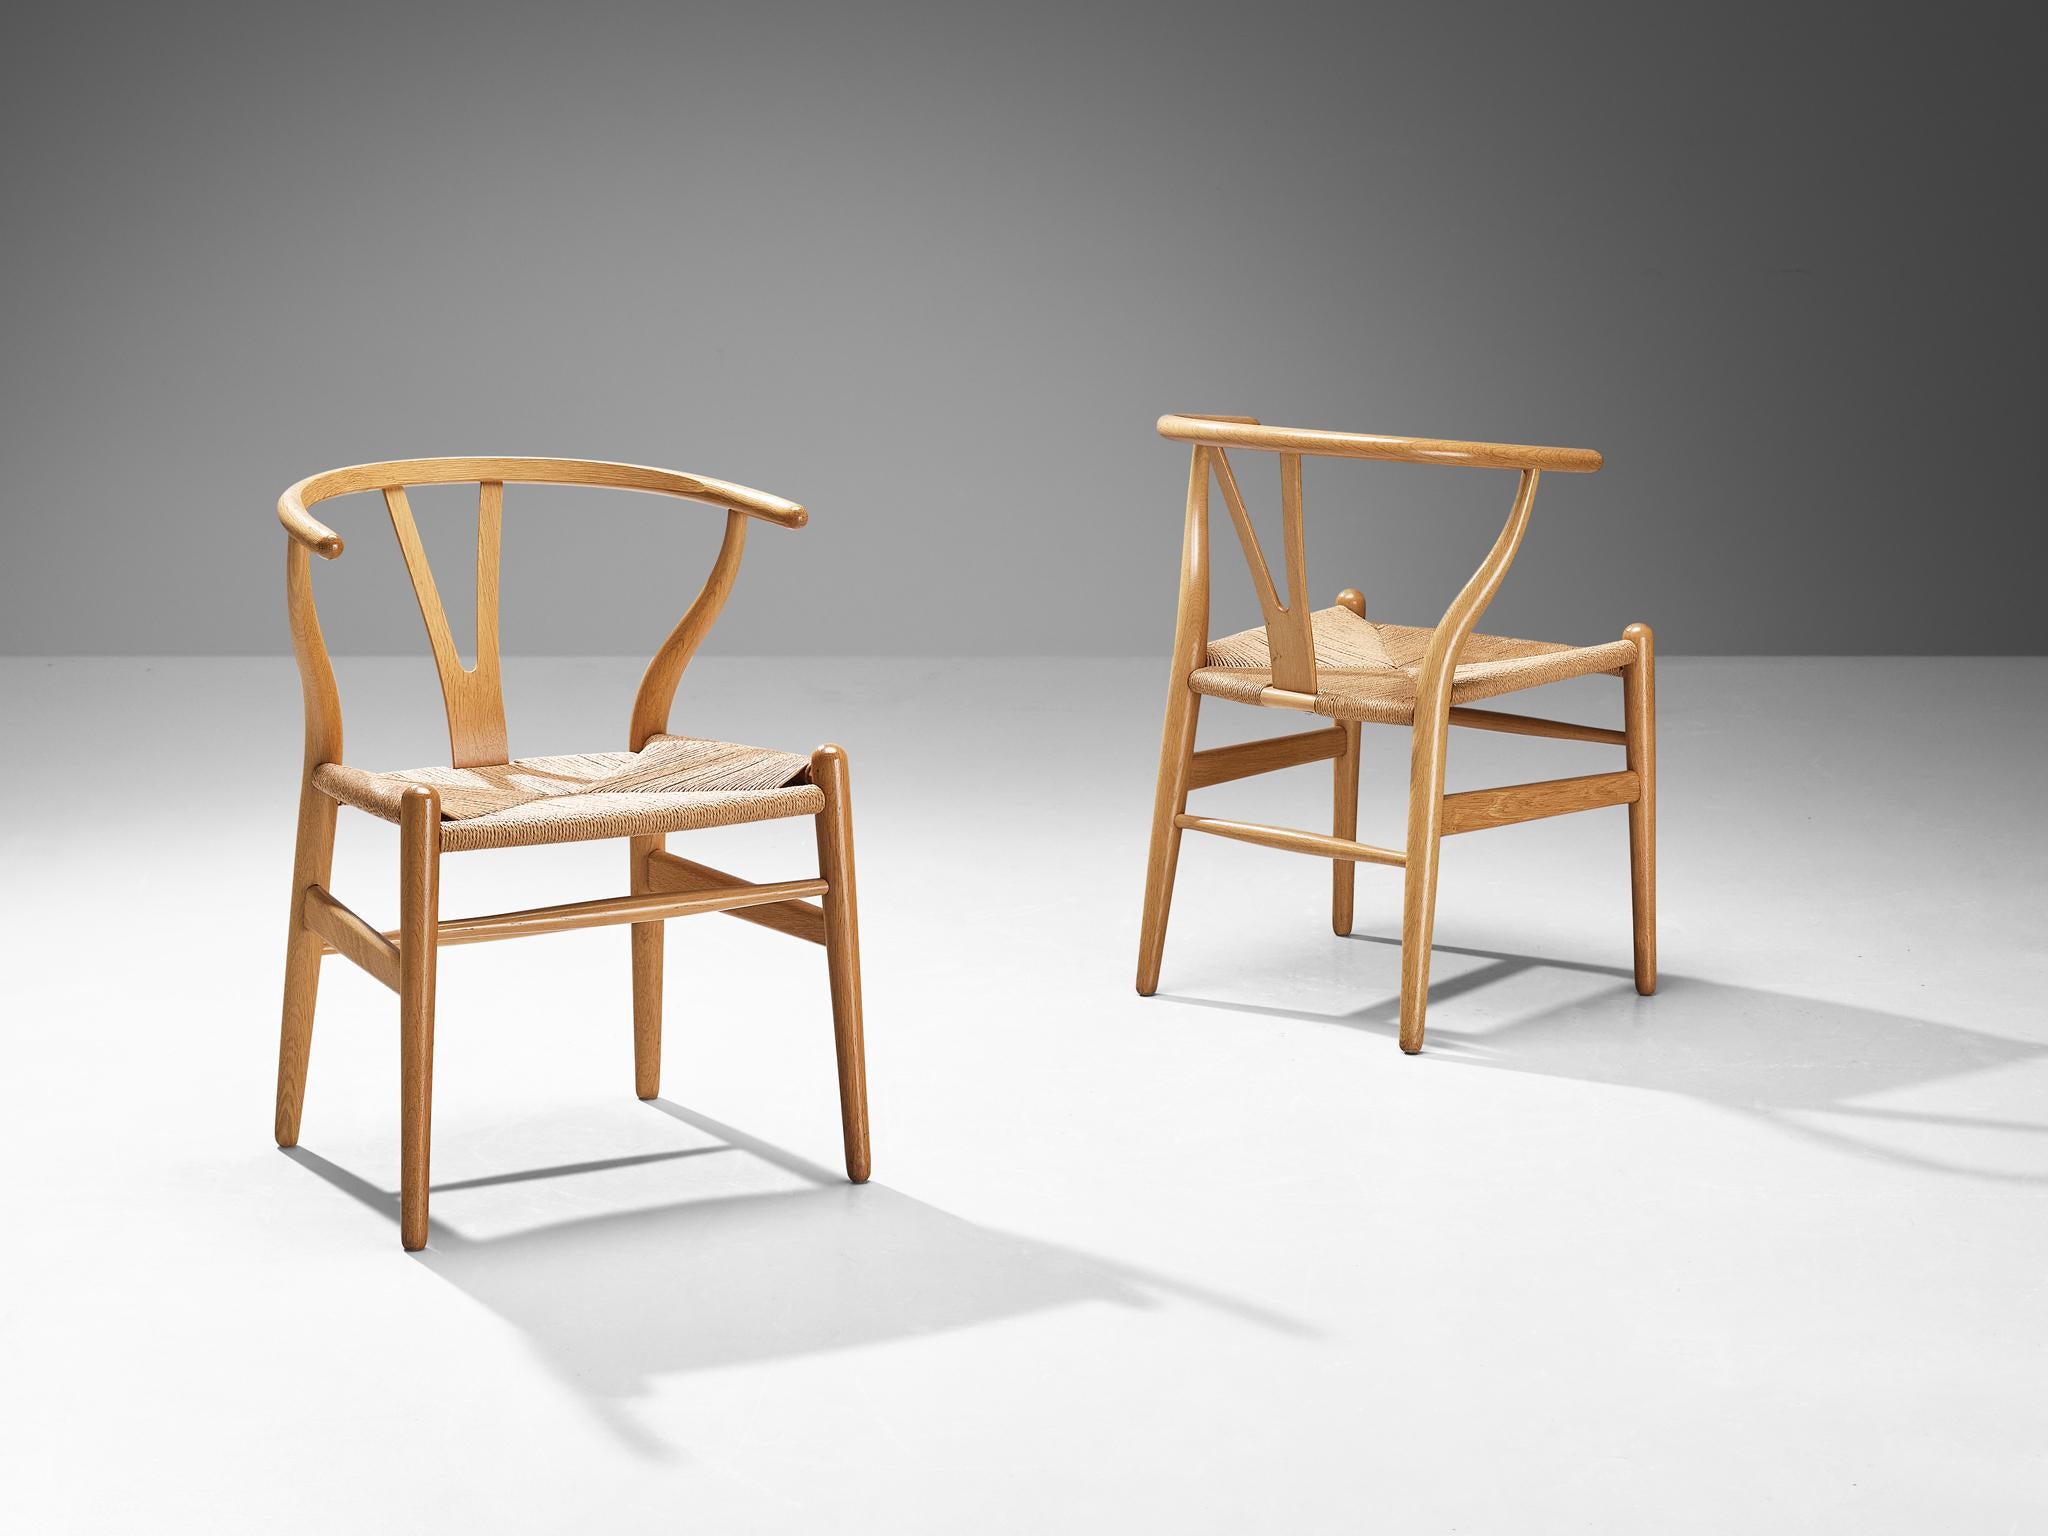 Hans J. Wegner for Carl Hansen & Søn, pair of 'Wishbone' chairs, model 'CH24', oak, papercord, Denmark, design 1950, production afterwards

The Wishbone chair is one of the best known and most celebrated designs of Hans Wegner. A simplistic design